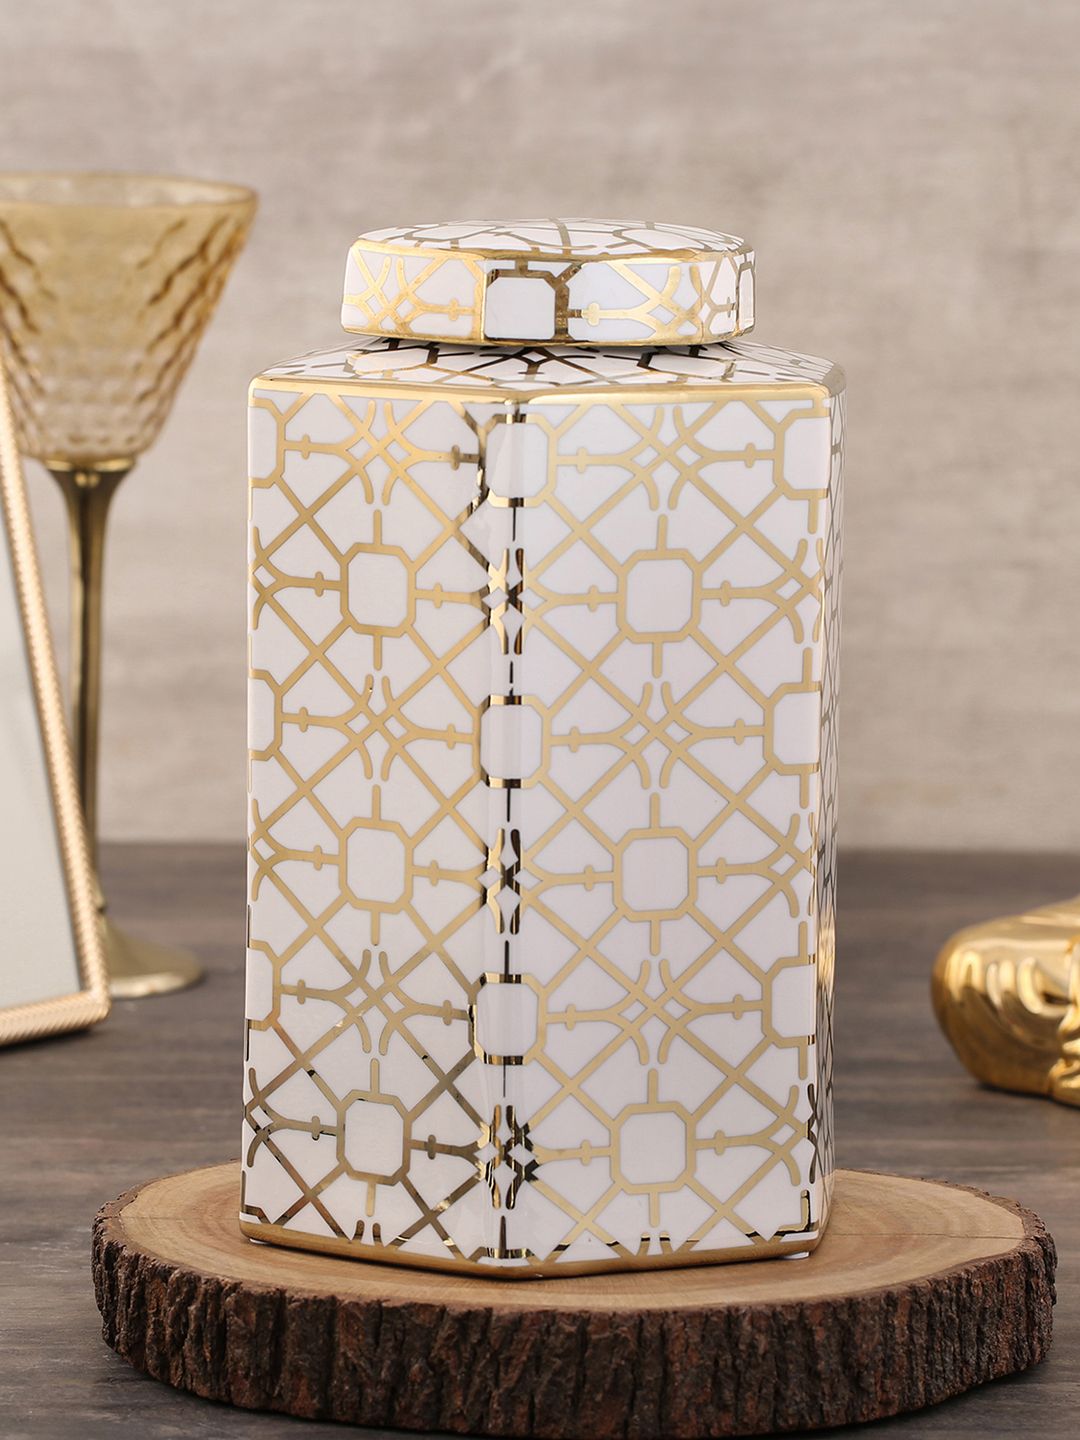 Pure Home and Living Gold-Toned & White Printed Large Ceramic Jar Price in India